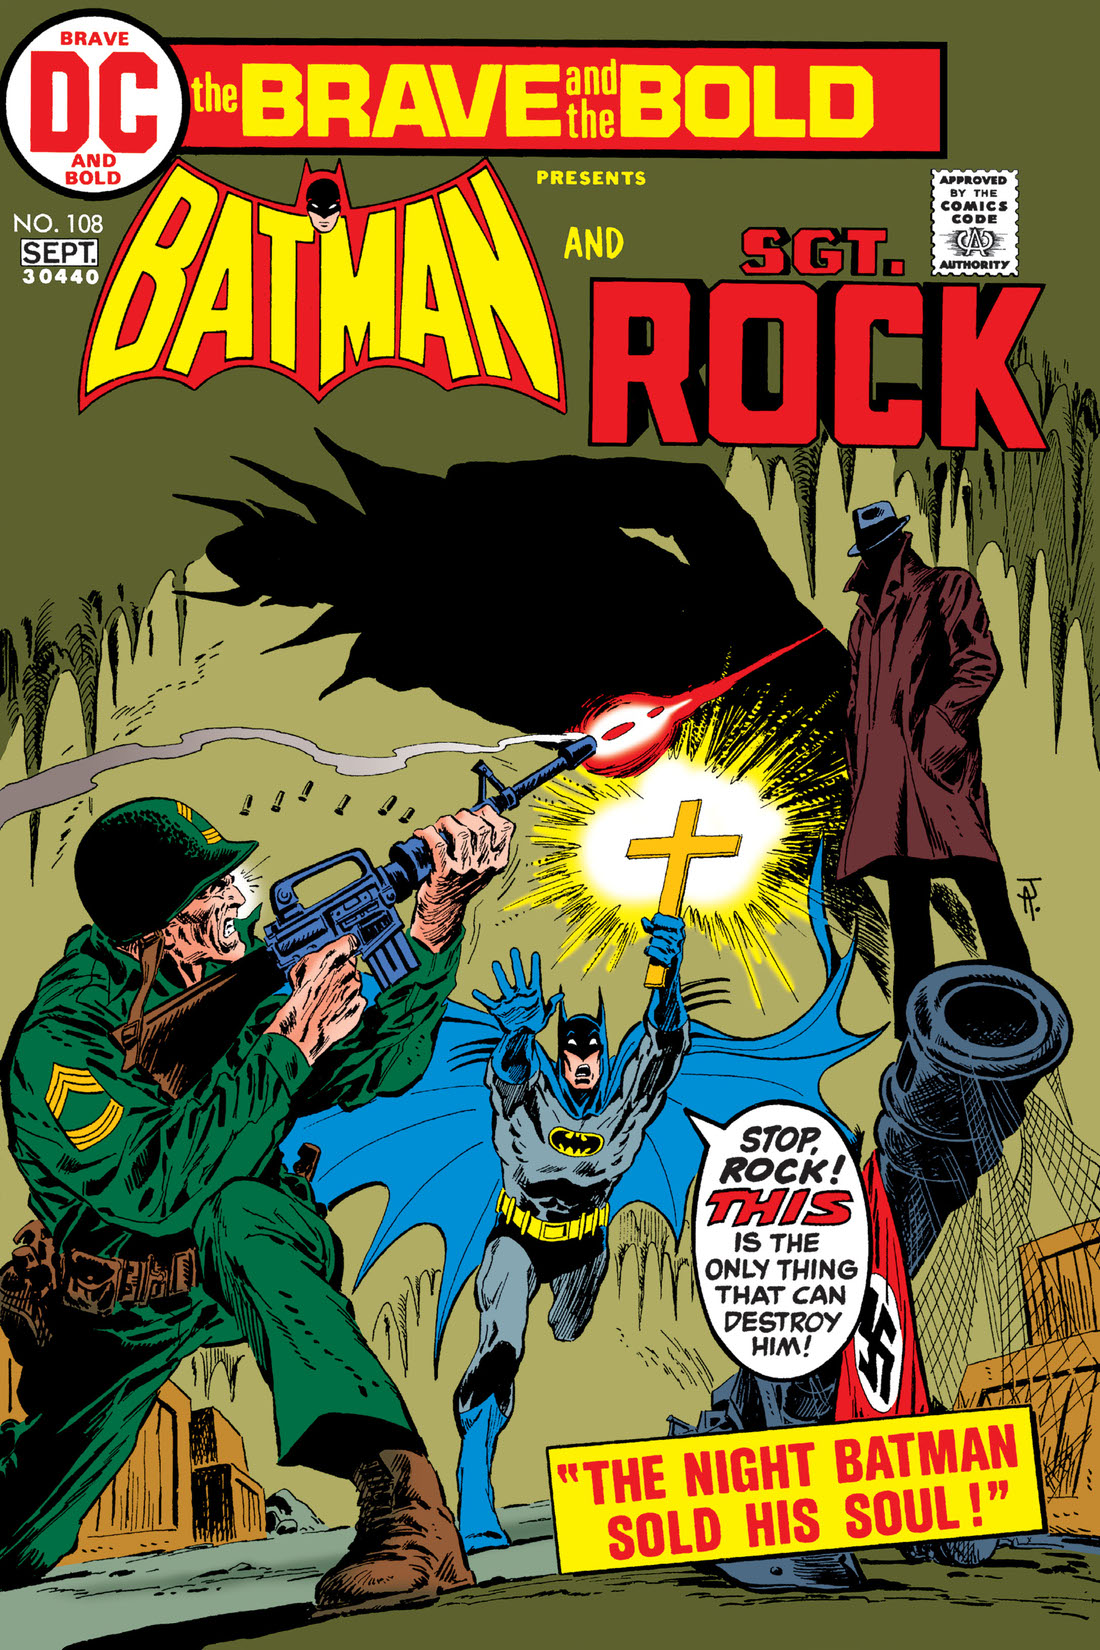 The Brave and the Bold (1955-) #108 preview images